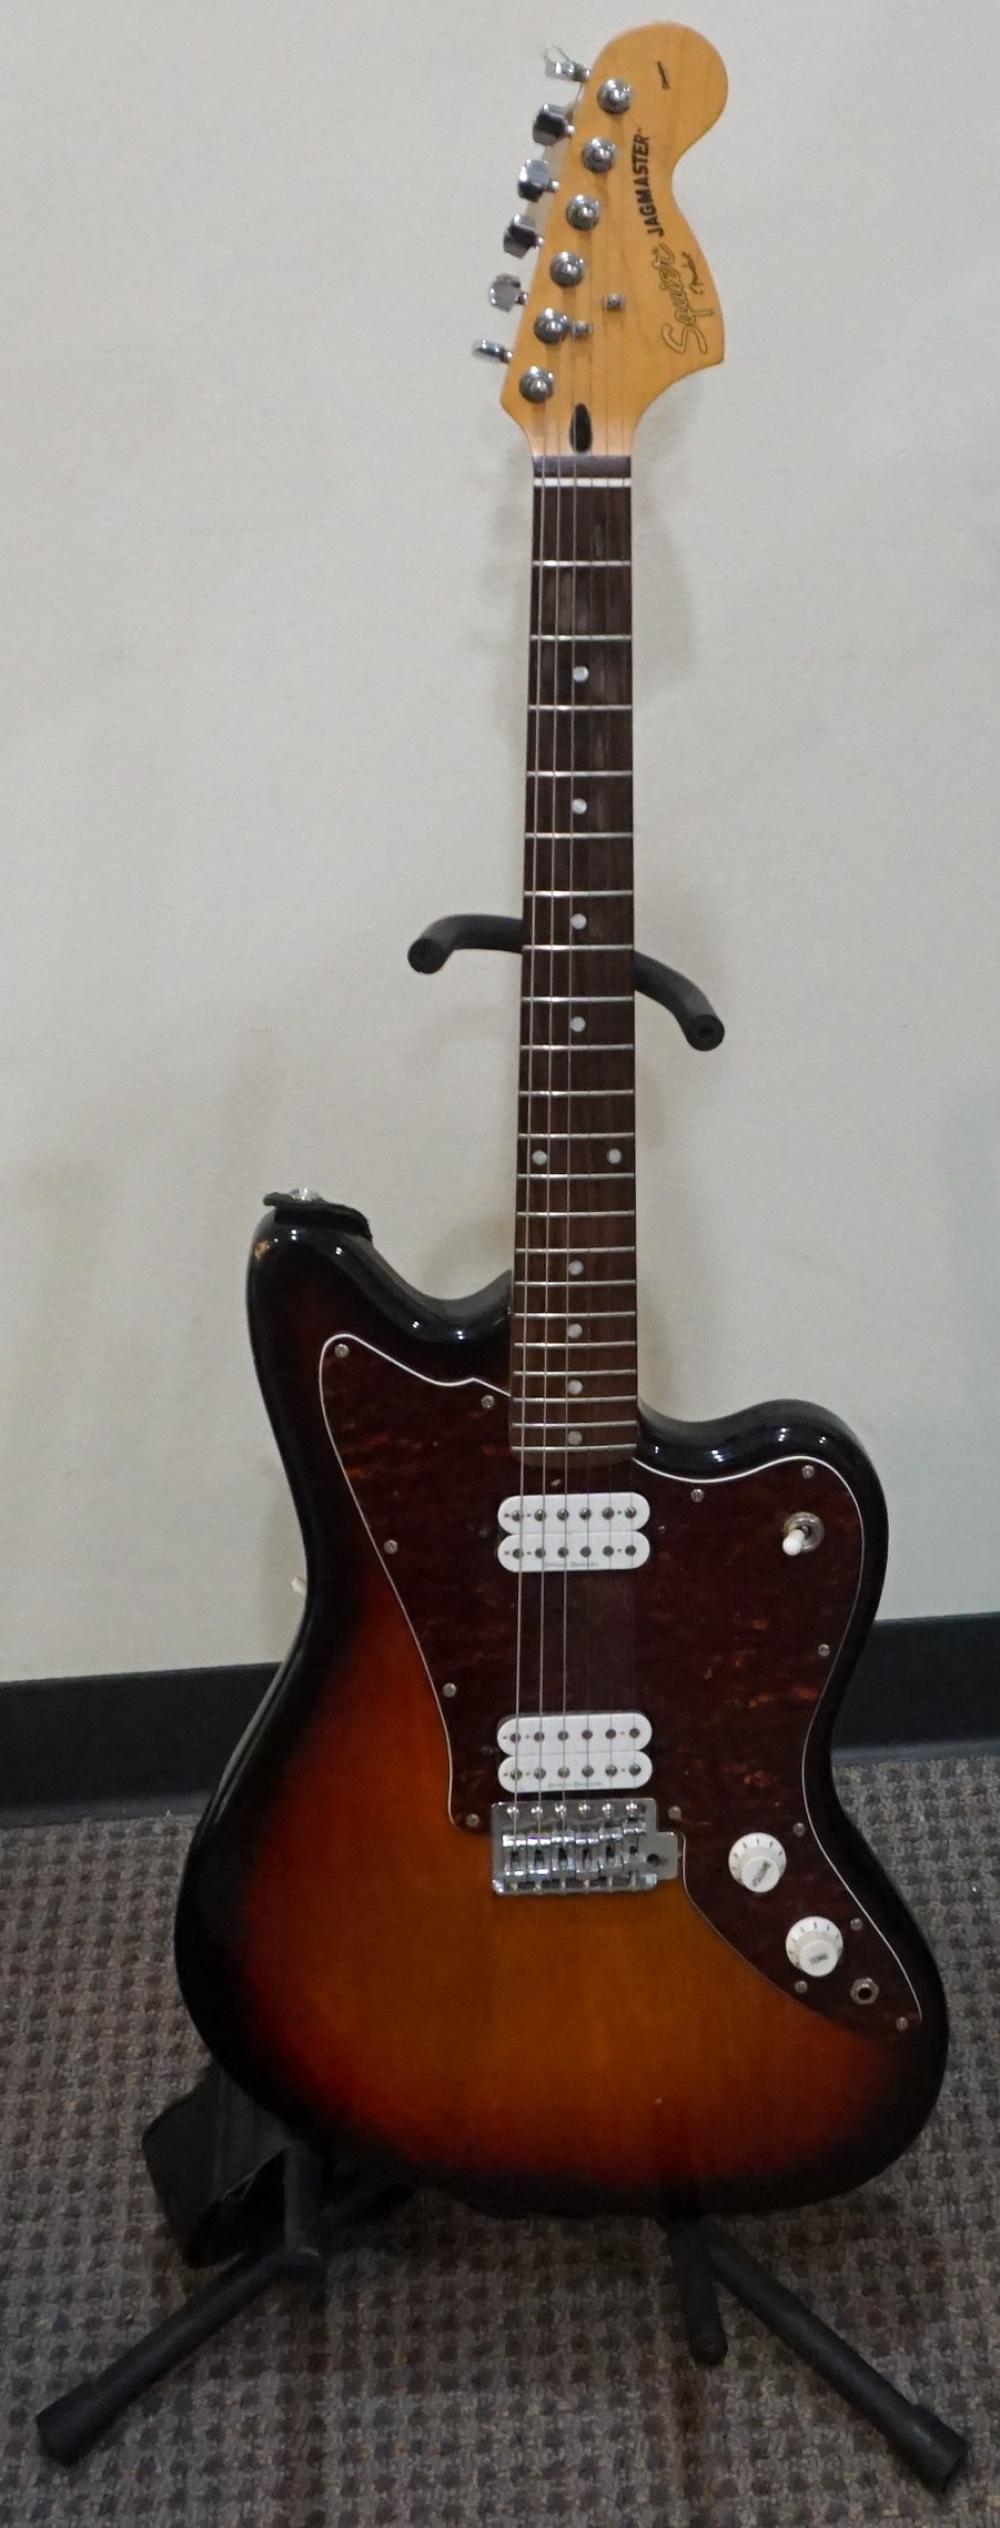 SQUIER FOR FENDER JAGMASTER ELECTRIC 330a36